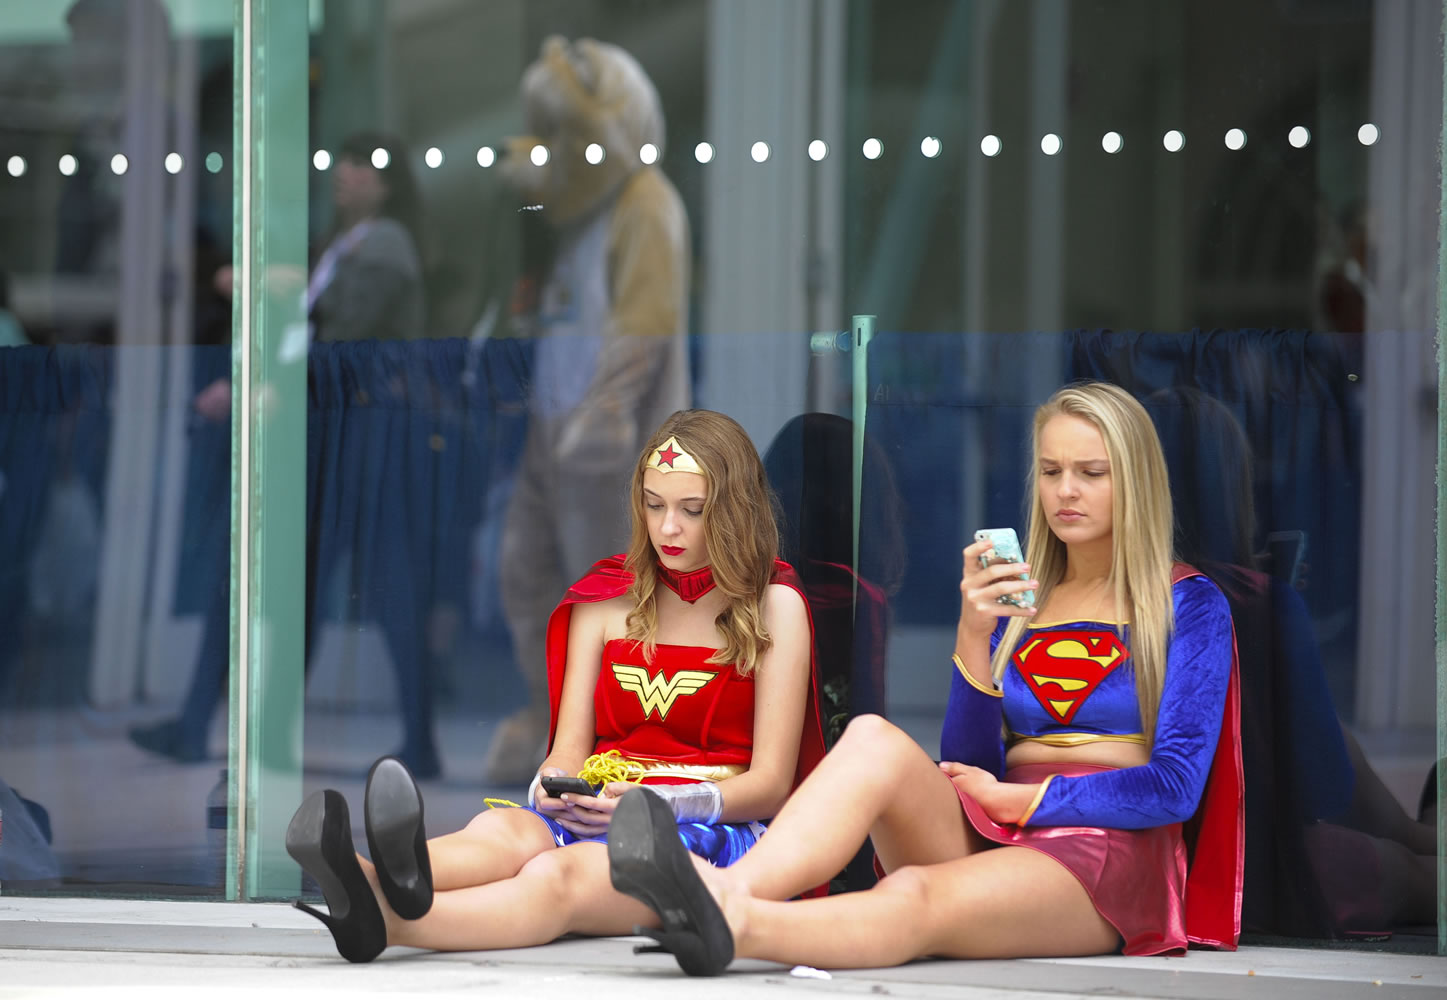 Denis Poroy/Invision
Joy Donaldson, left, dressed as Wonder Woman, and Everleigh Reed, dressed as Supergirl, take a break July 28 at the 2013 Comic-Con International Convention in San Diego.